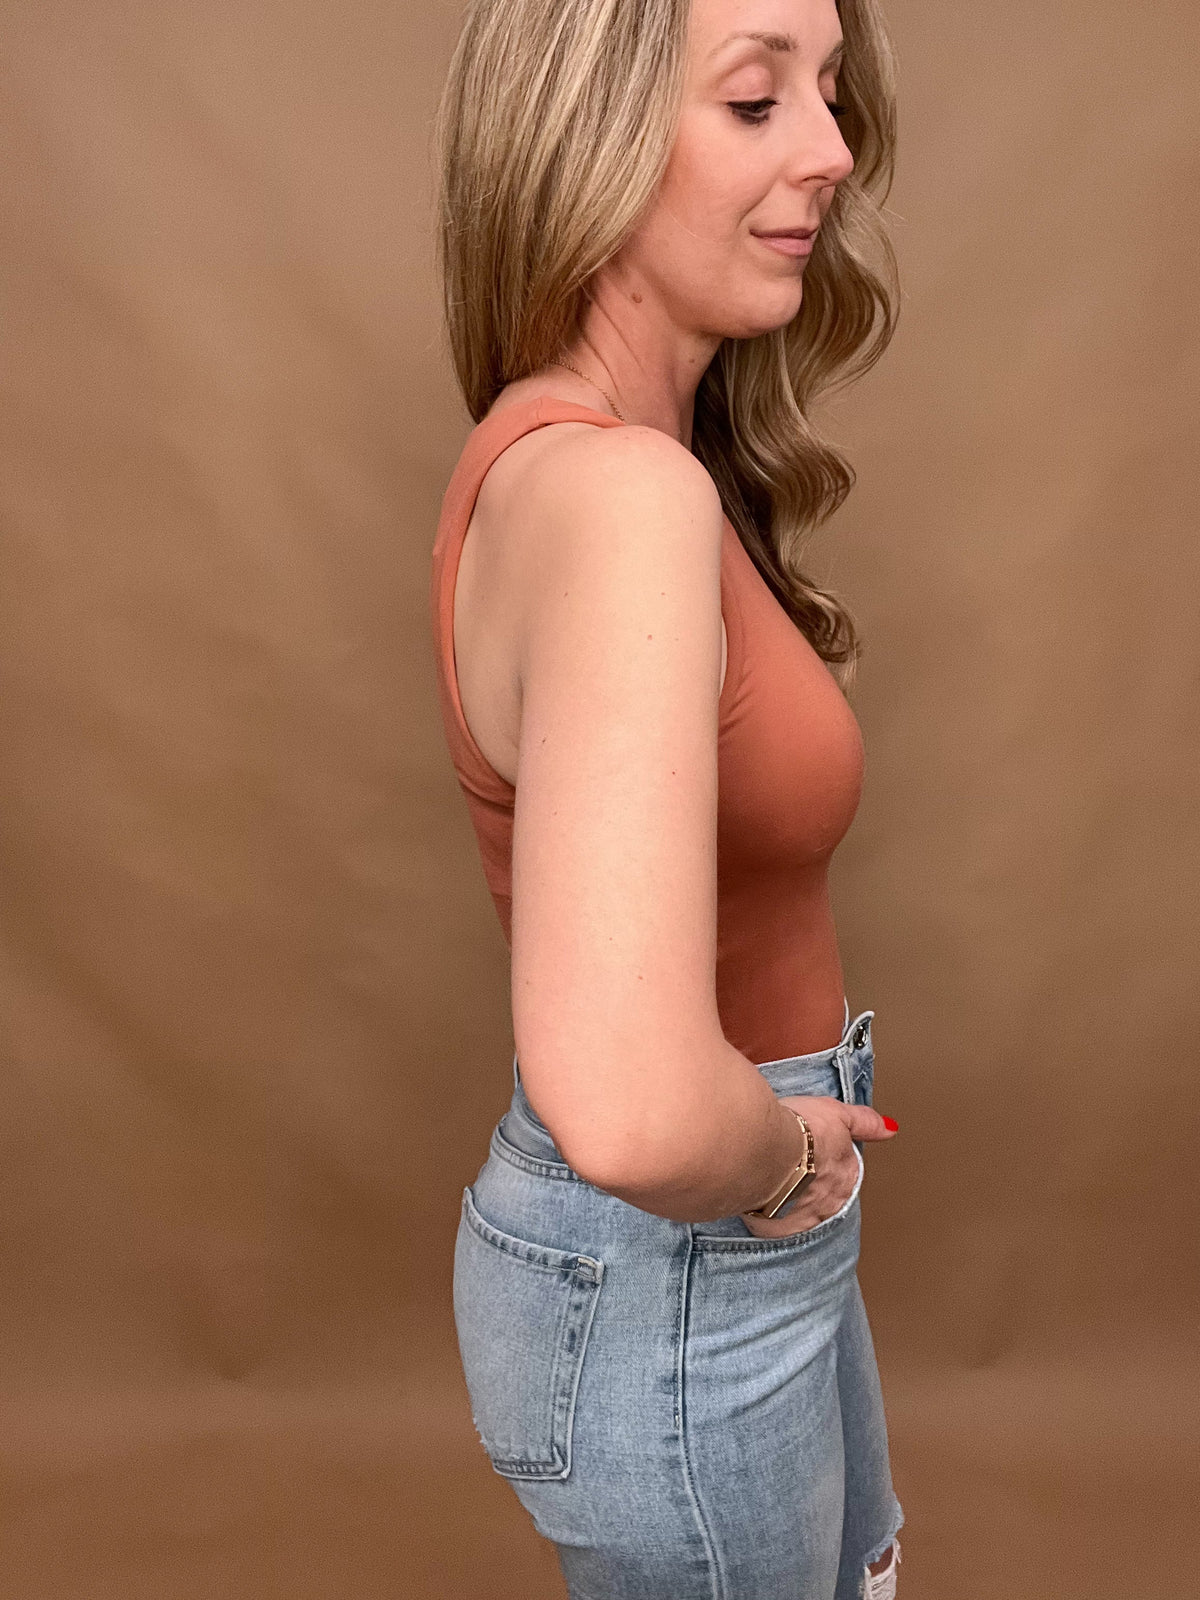 This sleek Round Neck, Sleeveless Knit Bodysuit is crafted with the highest quality materials and proudly made in America. Its warm copper tone brings a luxurious look and feel, ensuring that it will become a timeless staple in your wardrobe.